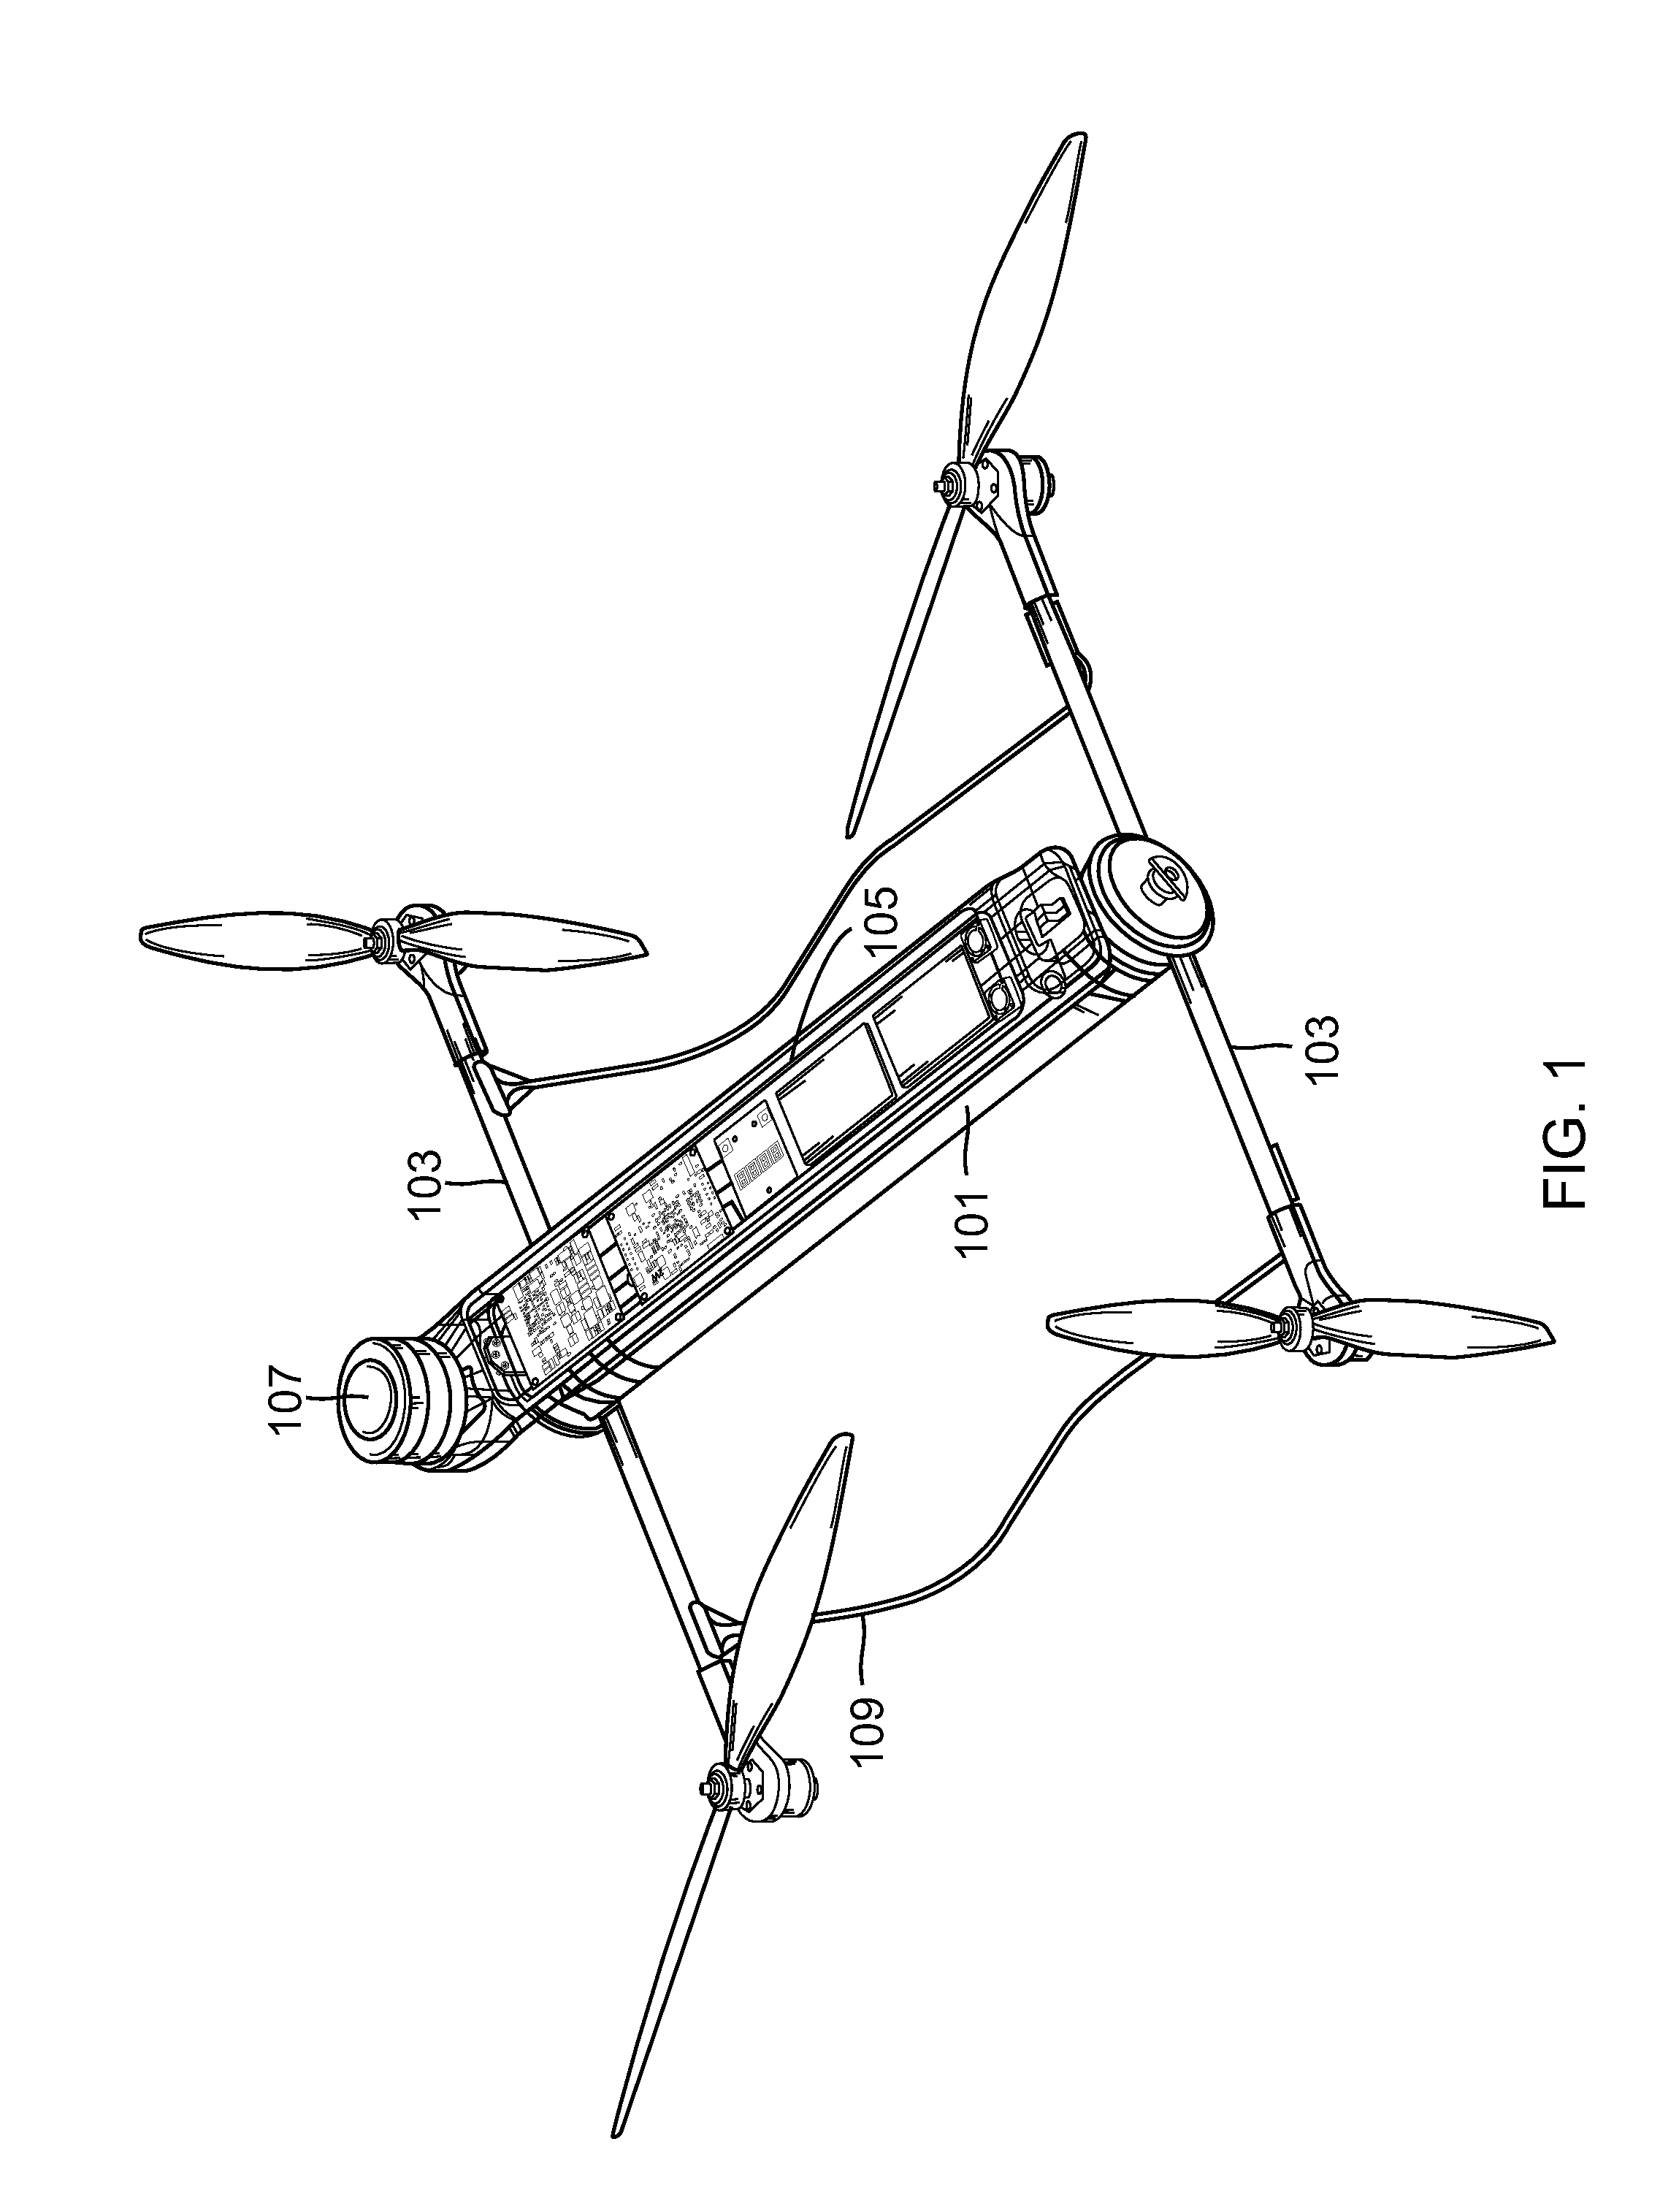 Reconfigurable battery-operated vehicle system